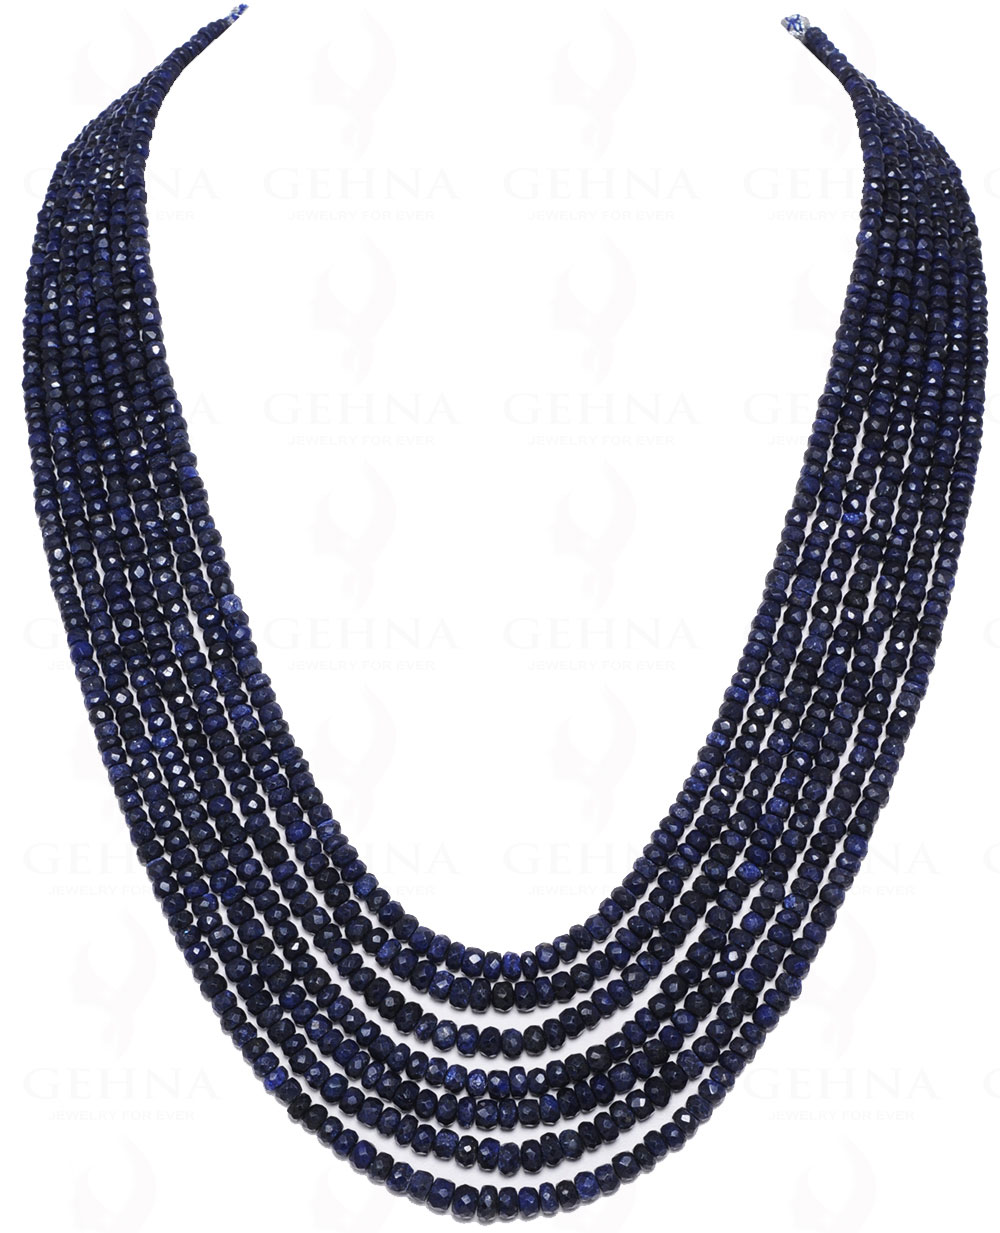 7 Rows Of African Blue Sapphire Gemstone Bead Necklace NP-1065